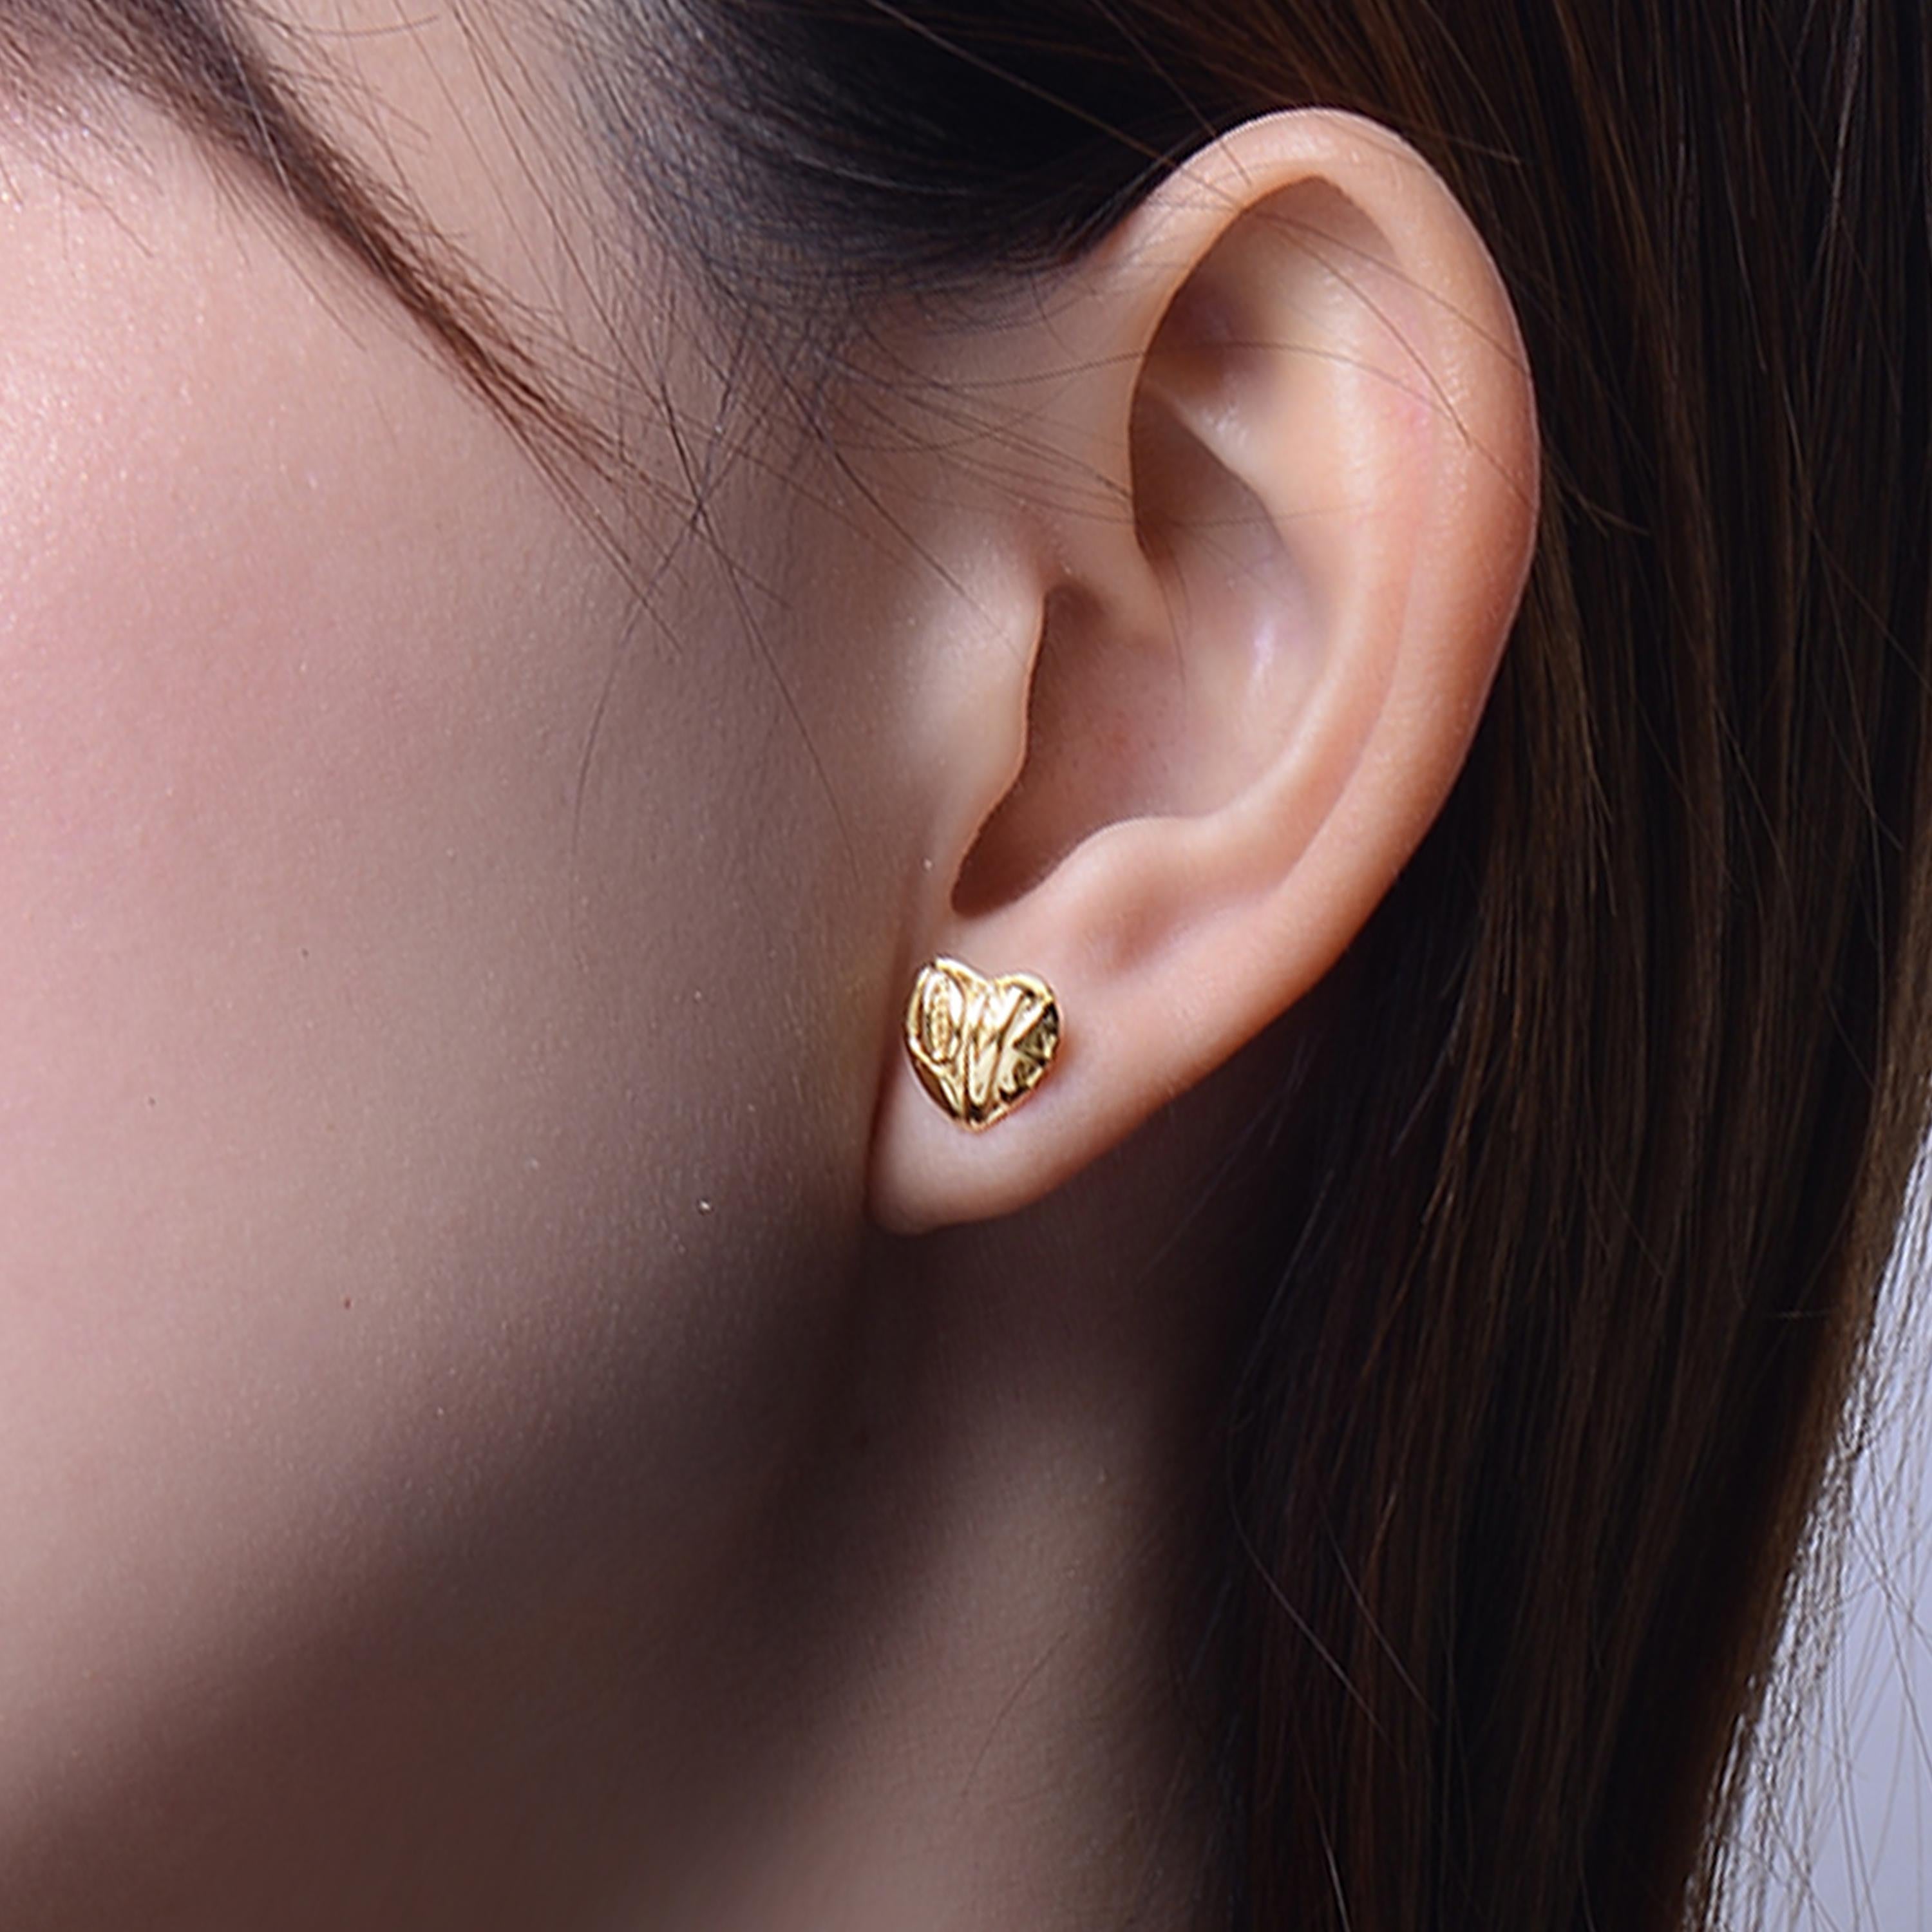 The limited-edition Love Heart Collection is the epitome of love is love, and it knows no bounds. The heart motifs of the Love Heart make for a much-loved gift for Valentine’s Day. These delicate stud earrings are each inscribed with the word